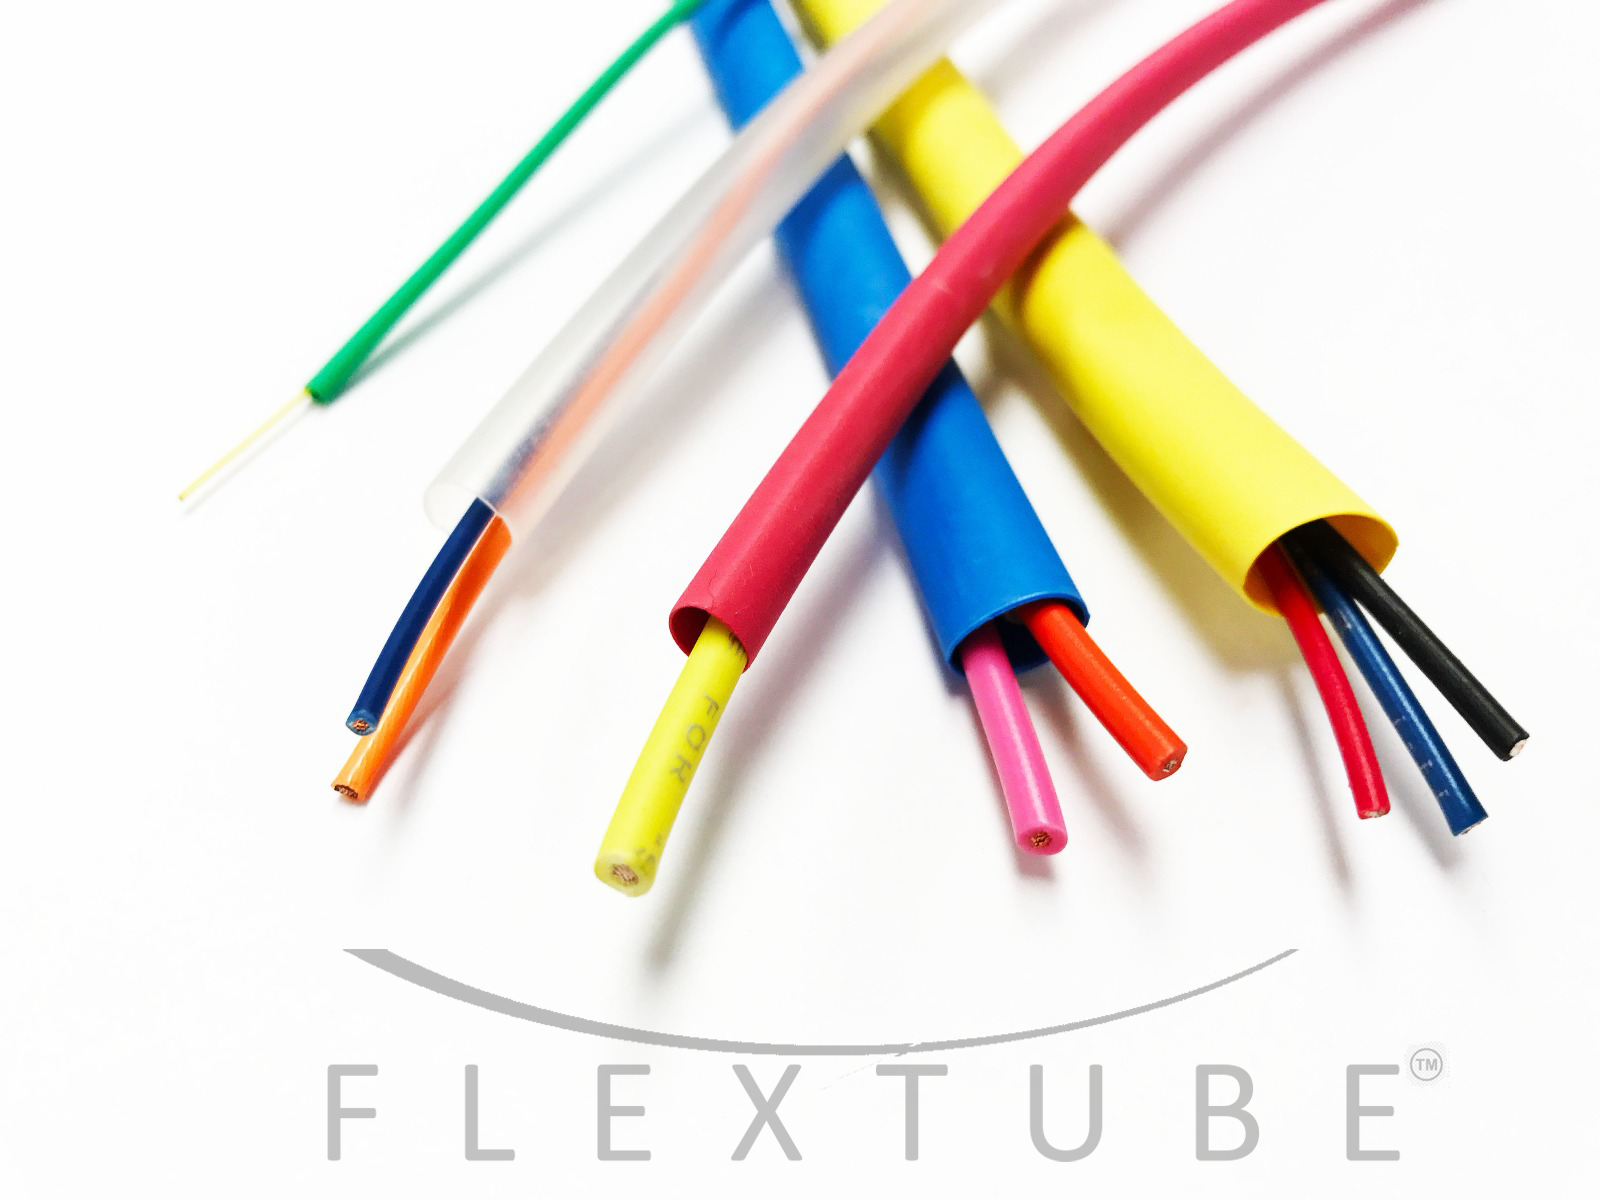 Home - Flexwires-Wires, Heat Shrink Tubing, Wire Hardness, and More